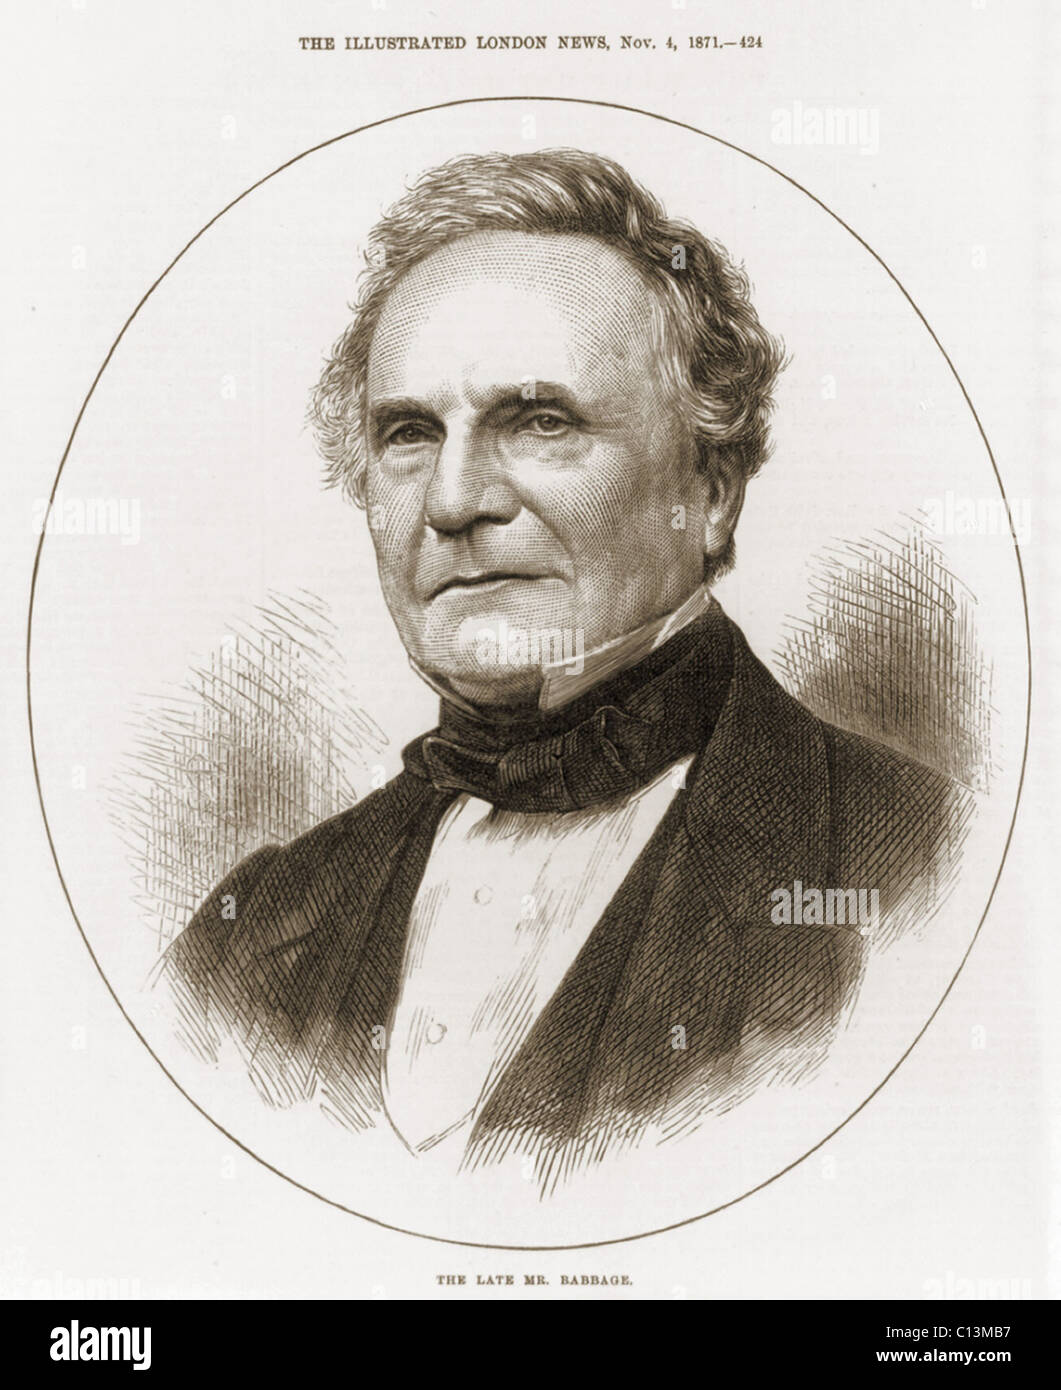 Charles Babbage 1792-1871 English mathematician and engineer who build the most advanced mechanical calculation device of his time. His mechanical computer anticipated the development of 20th century information technology. 1871. Stock Photo